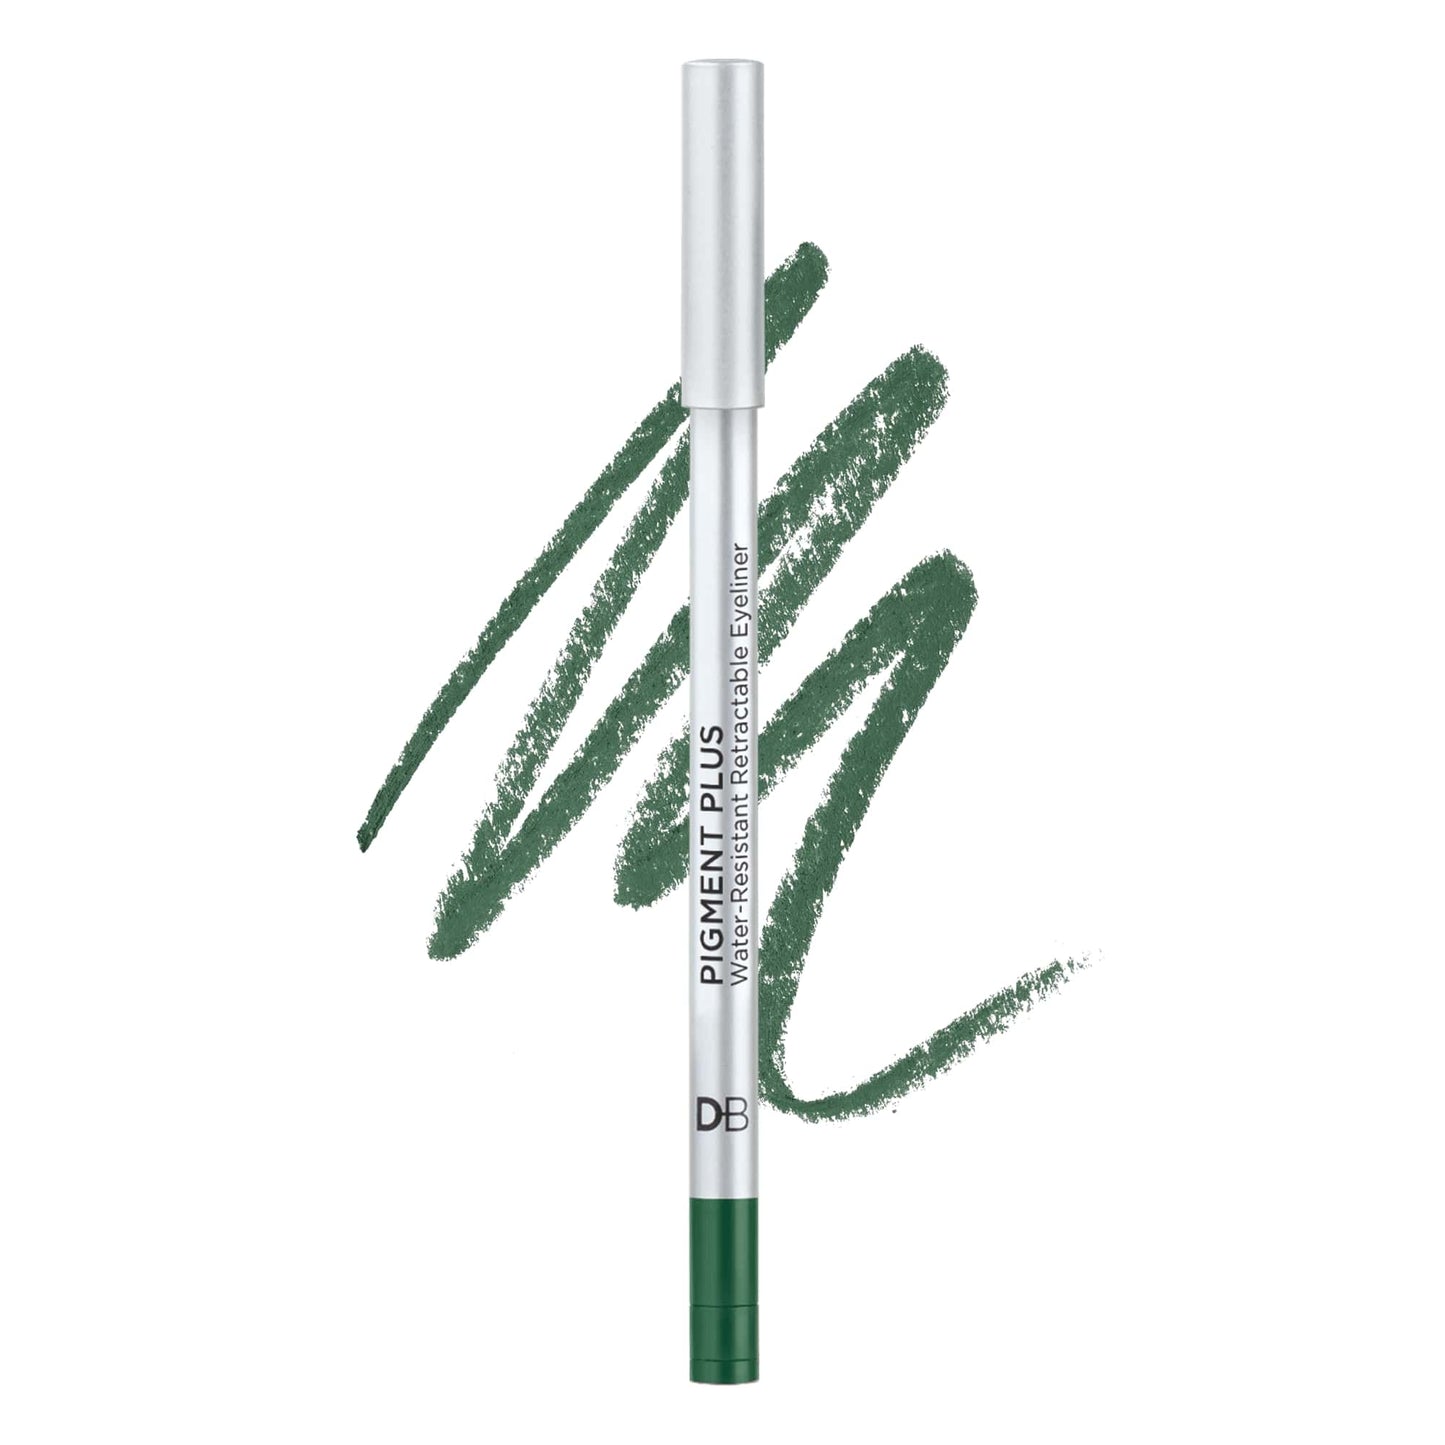 Pigment Plus Water Resistant Eyeliner (Emerald Sea) with swatch | DB Cosmetics